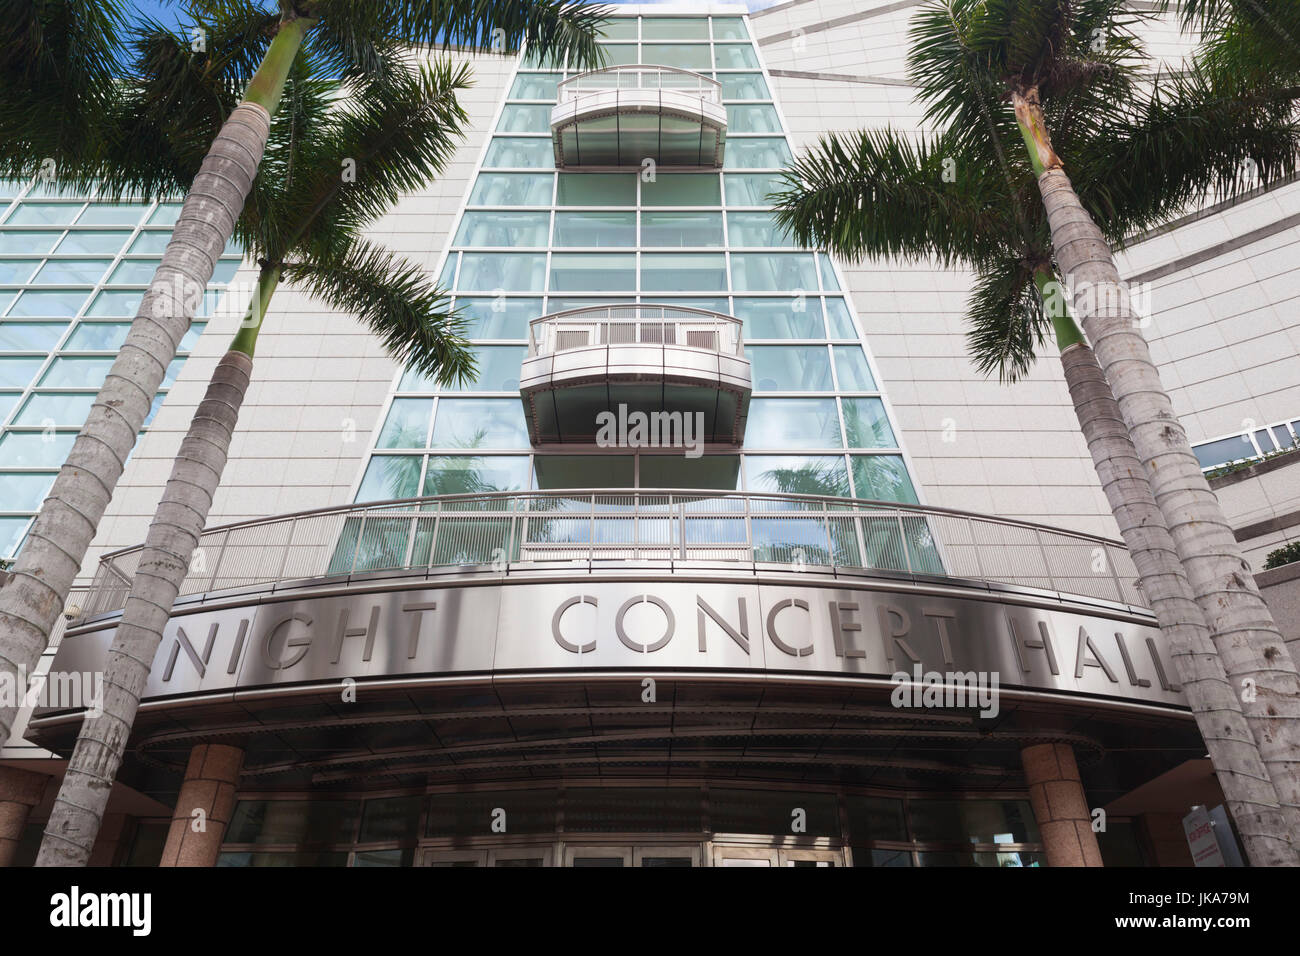 USA, Florida, Miami, Adrienne Arsht Center for the Performing Arts Banque D'Images